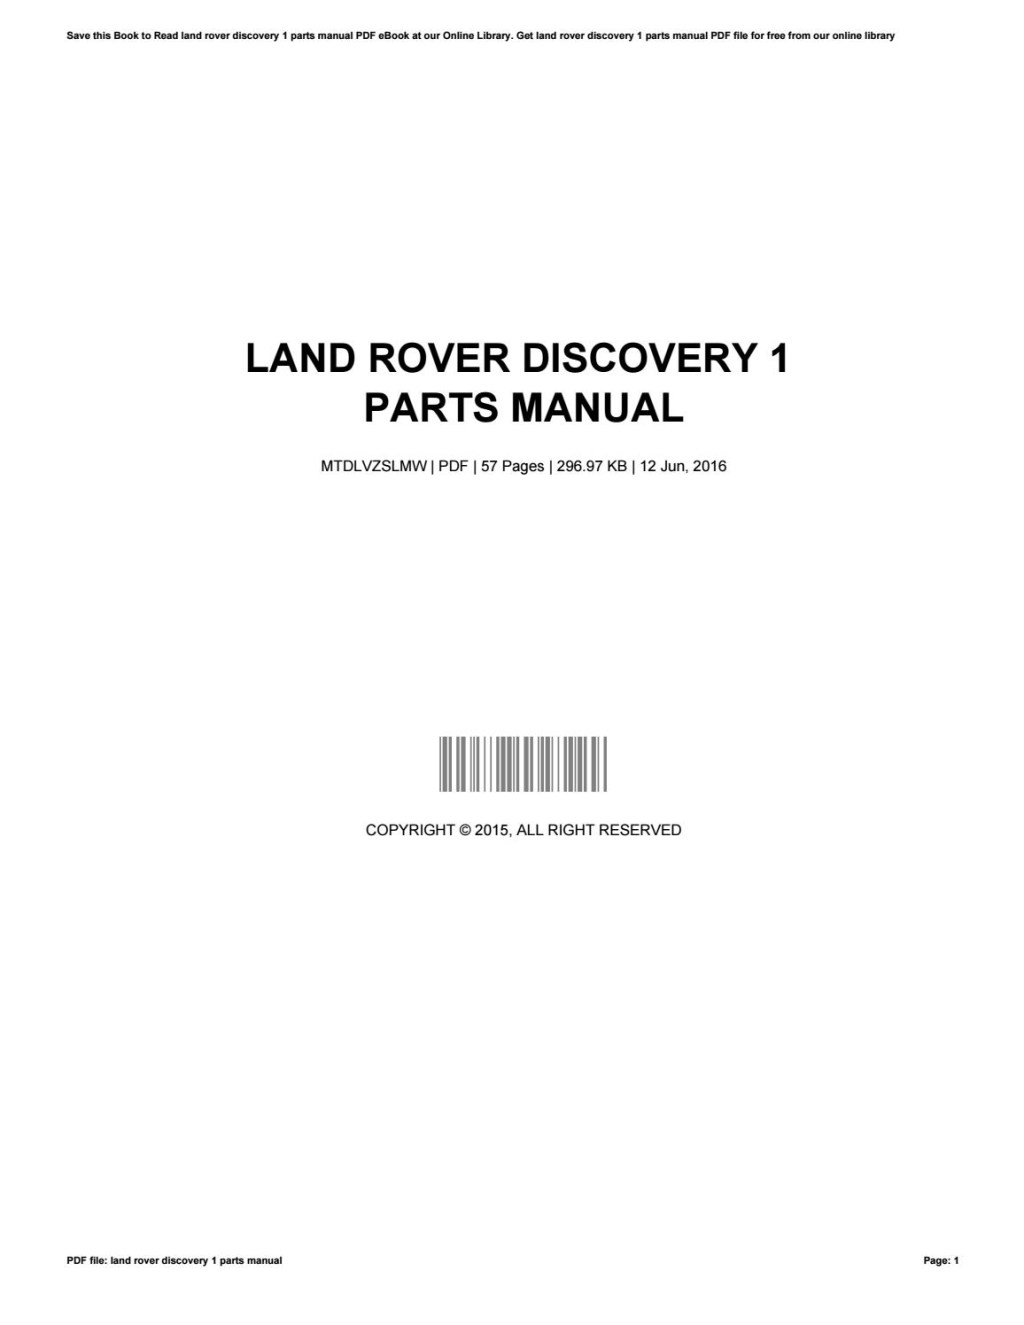 Picture of: Land rover discovery  parts manual by JaredRoy – Issuu